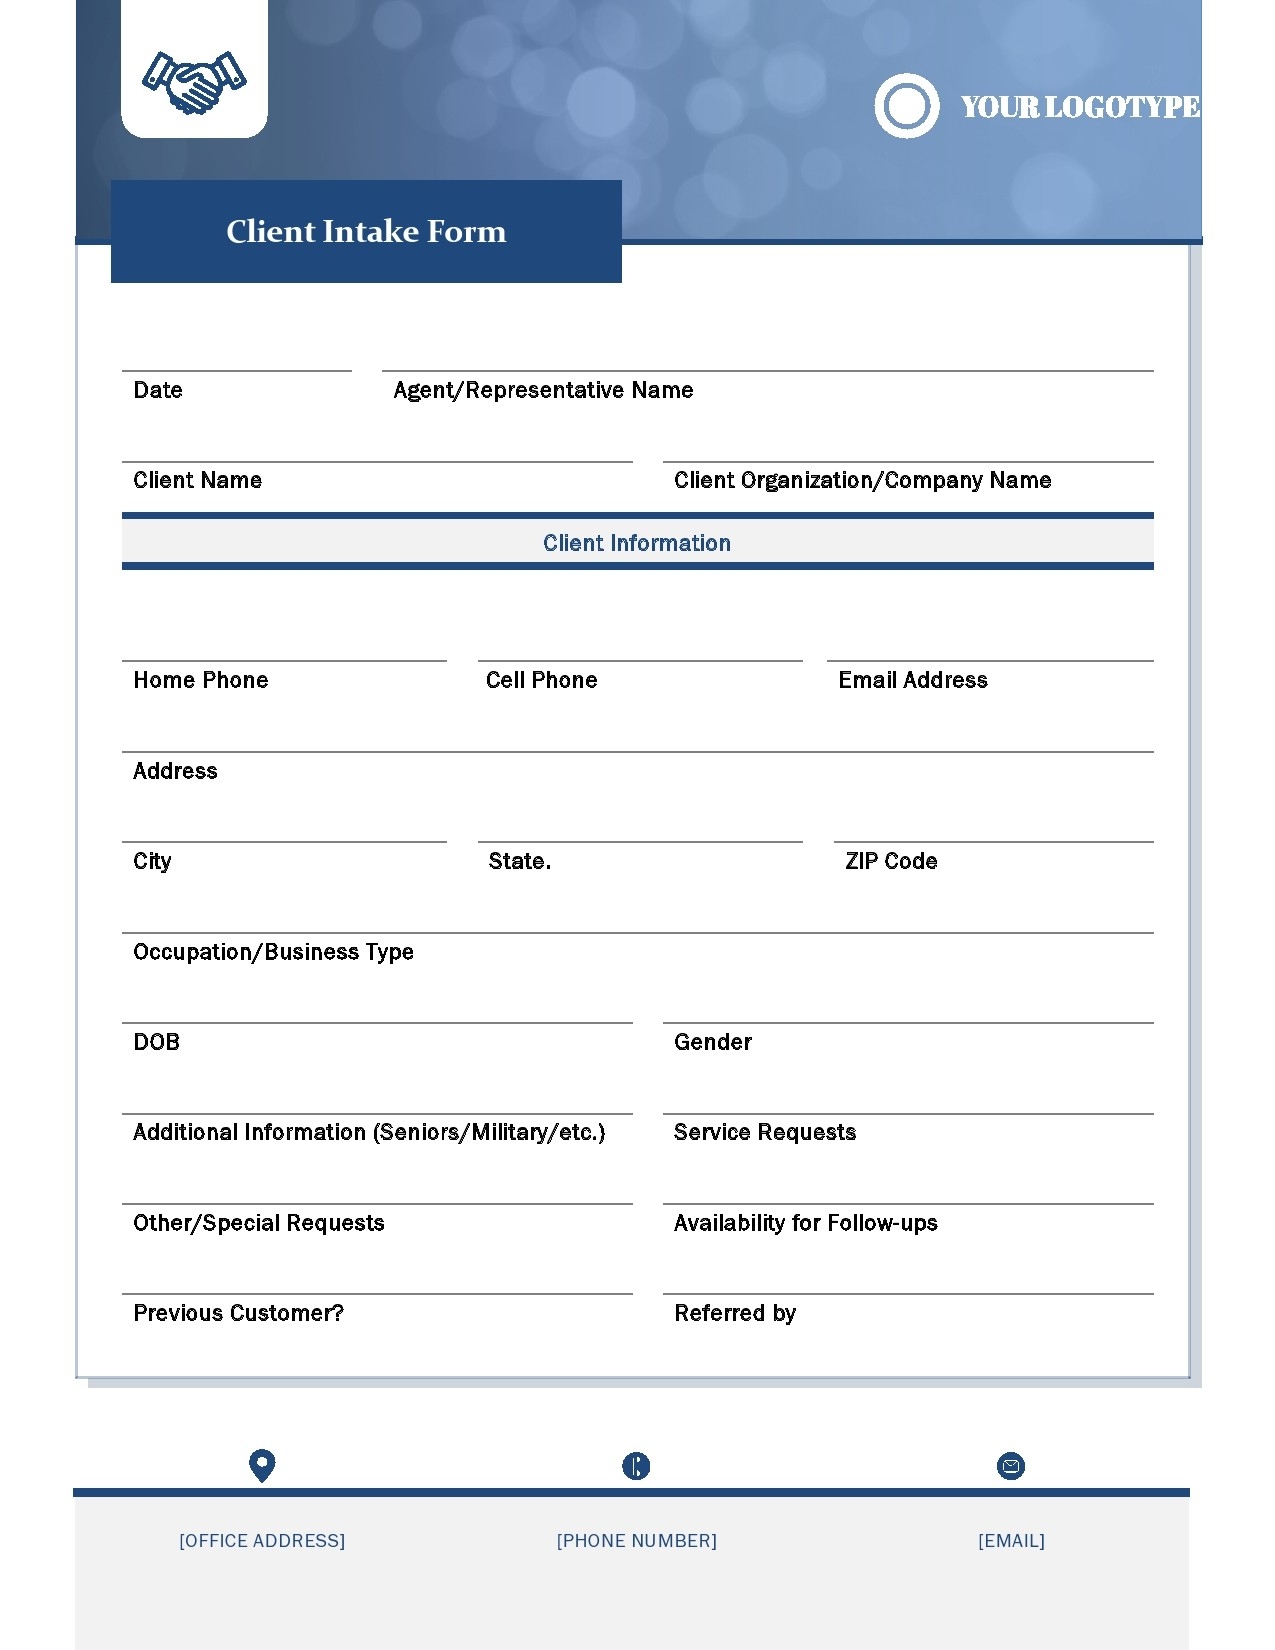 42 Printable Client Intake Forms FREE Templates TemplateLab